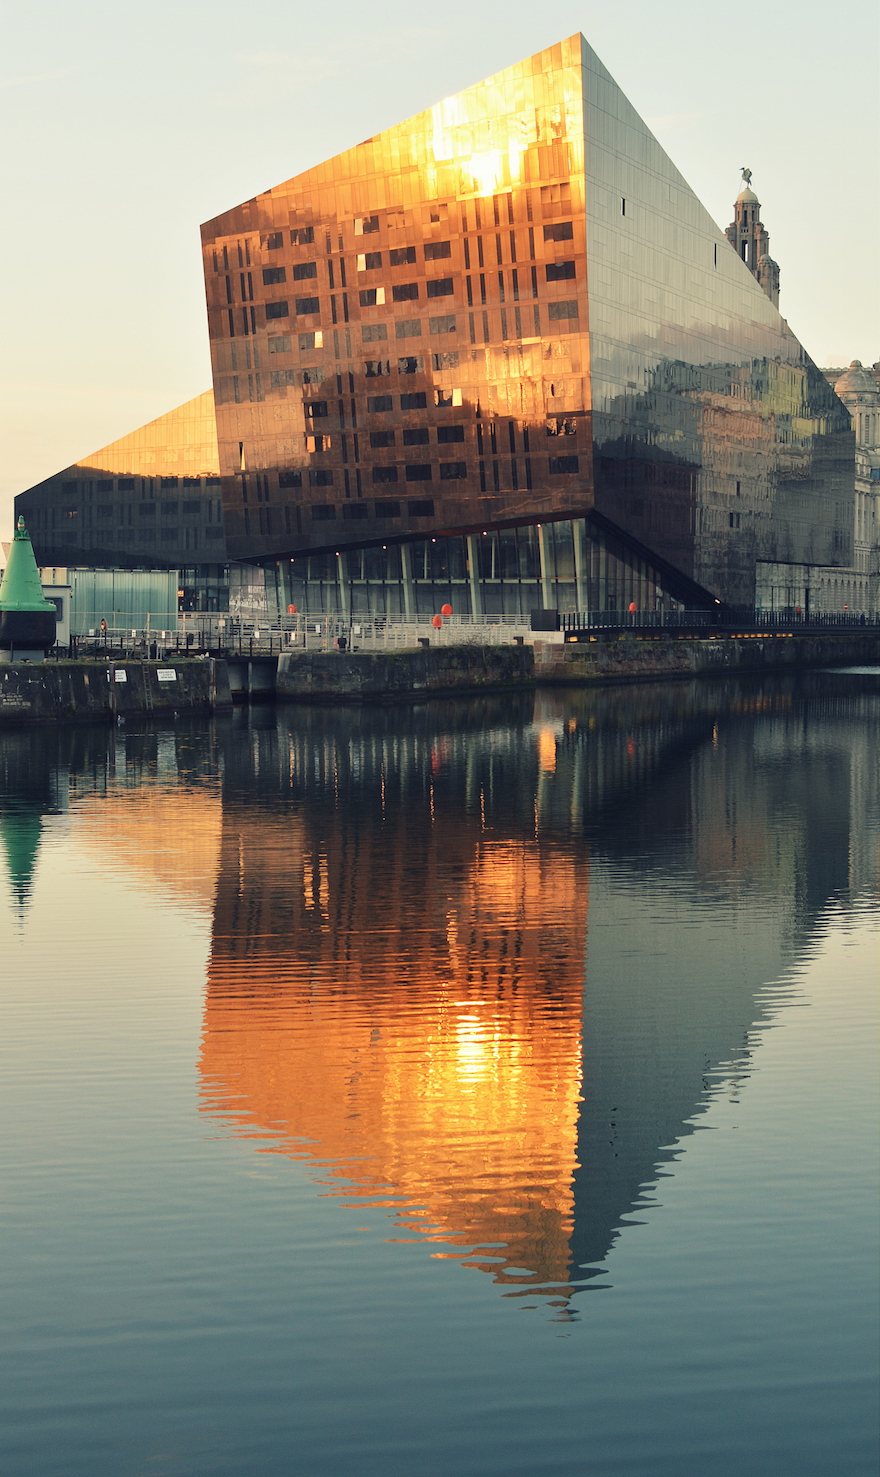 2014 - Canning dock - Liverpool, England (3413 × 5727)